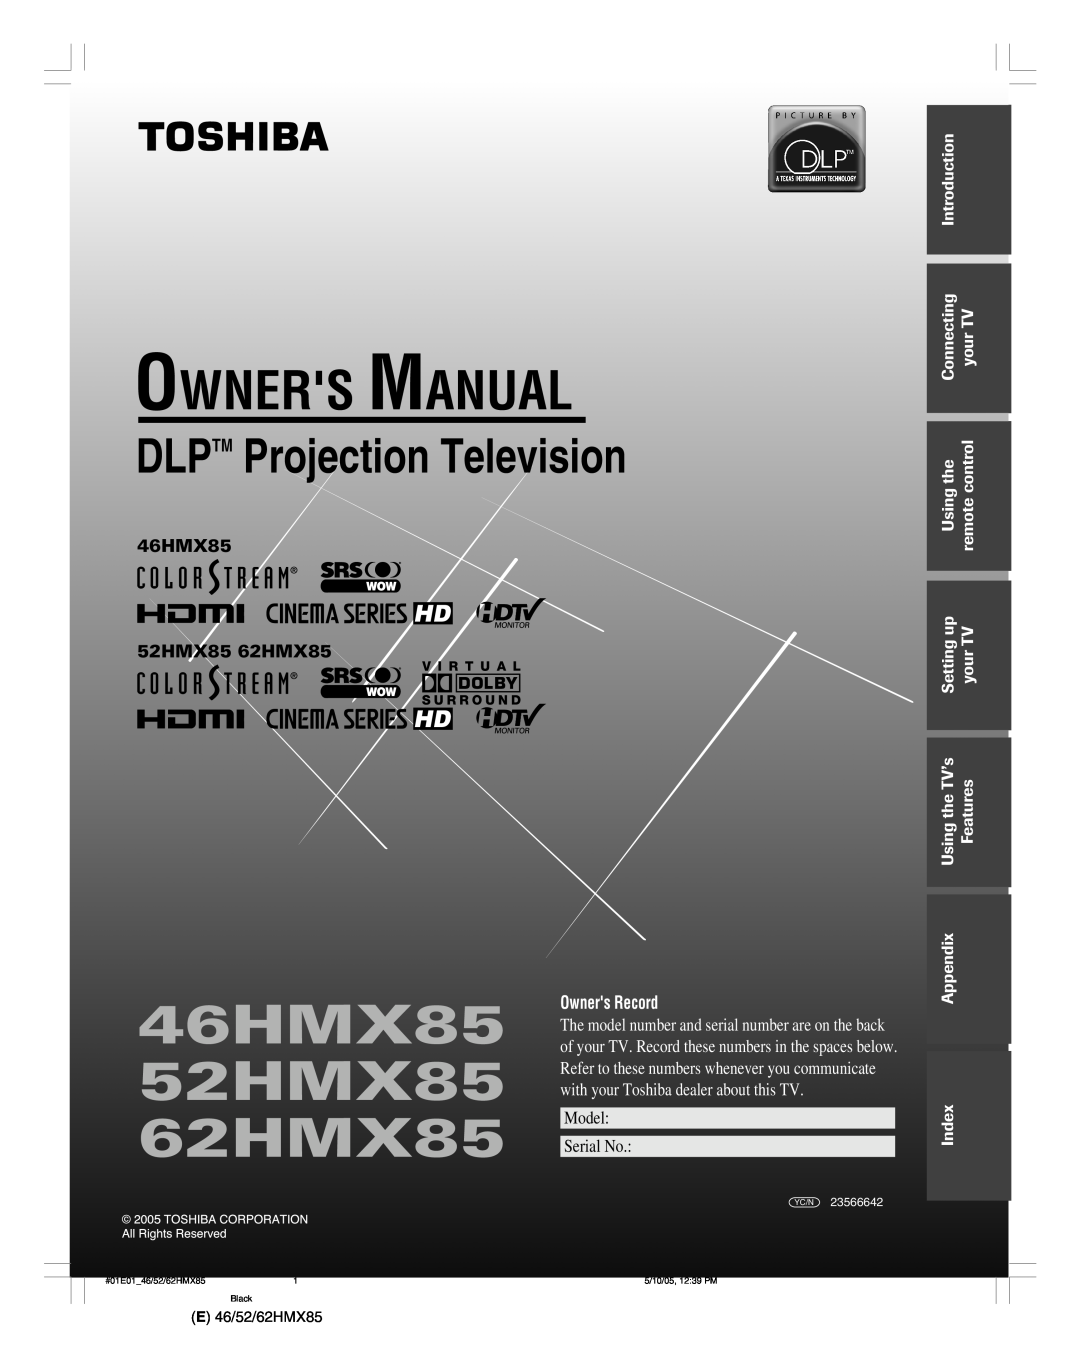 Toshiba owner manual 46HMX85 52HMX85 62HMX85, Introduction, Connecting, yourTV, Usingthe, remotecontrol, Settingup 